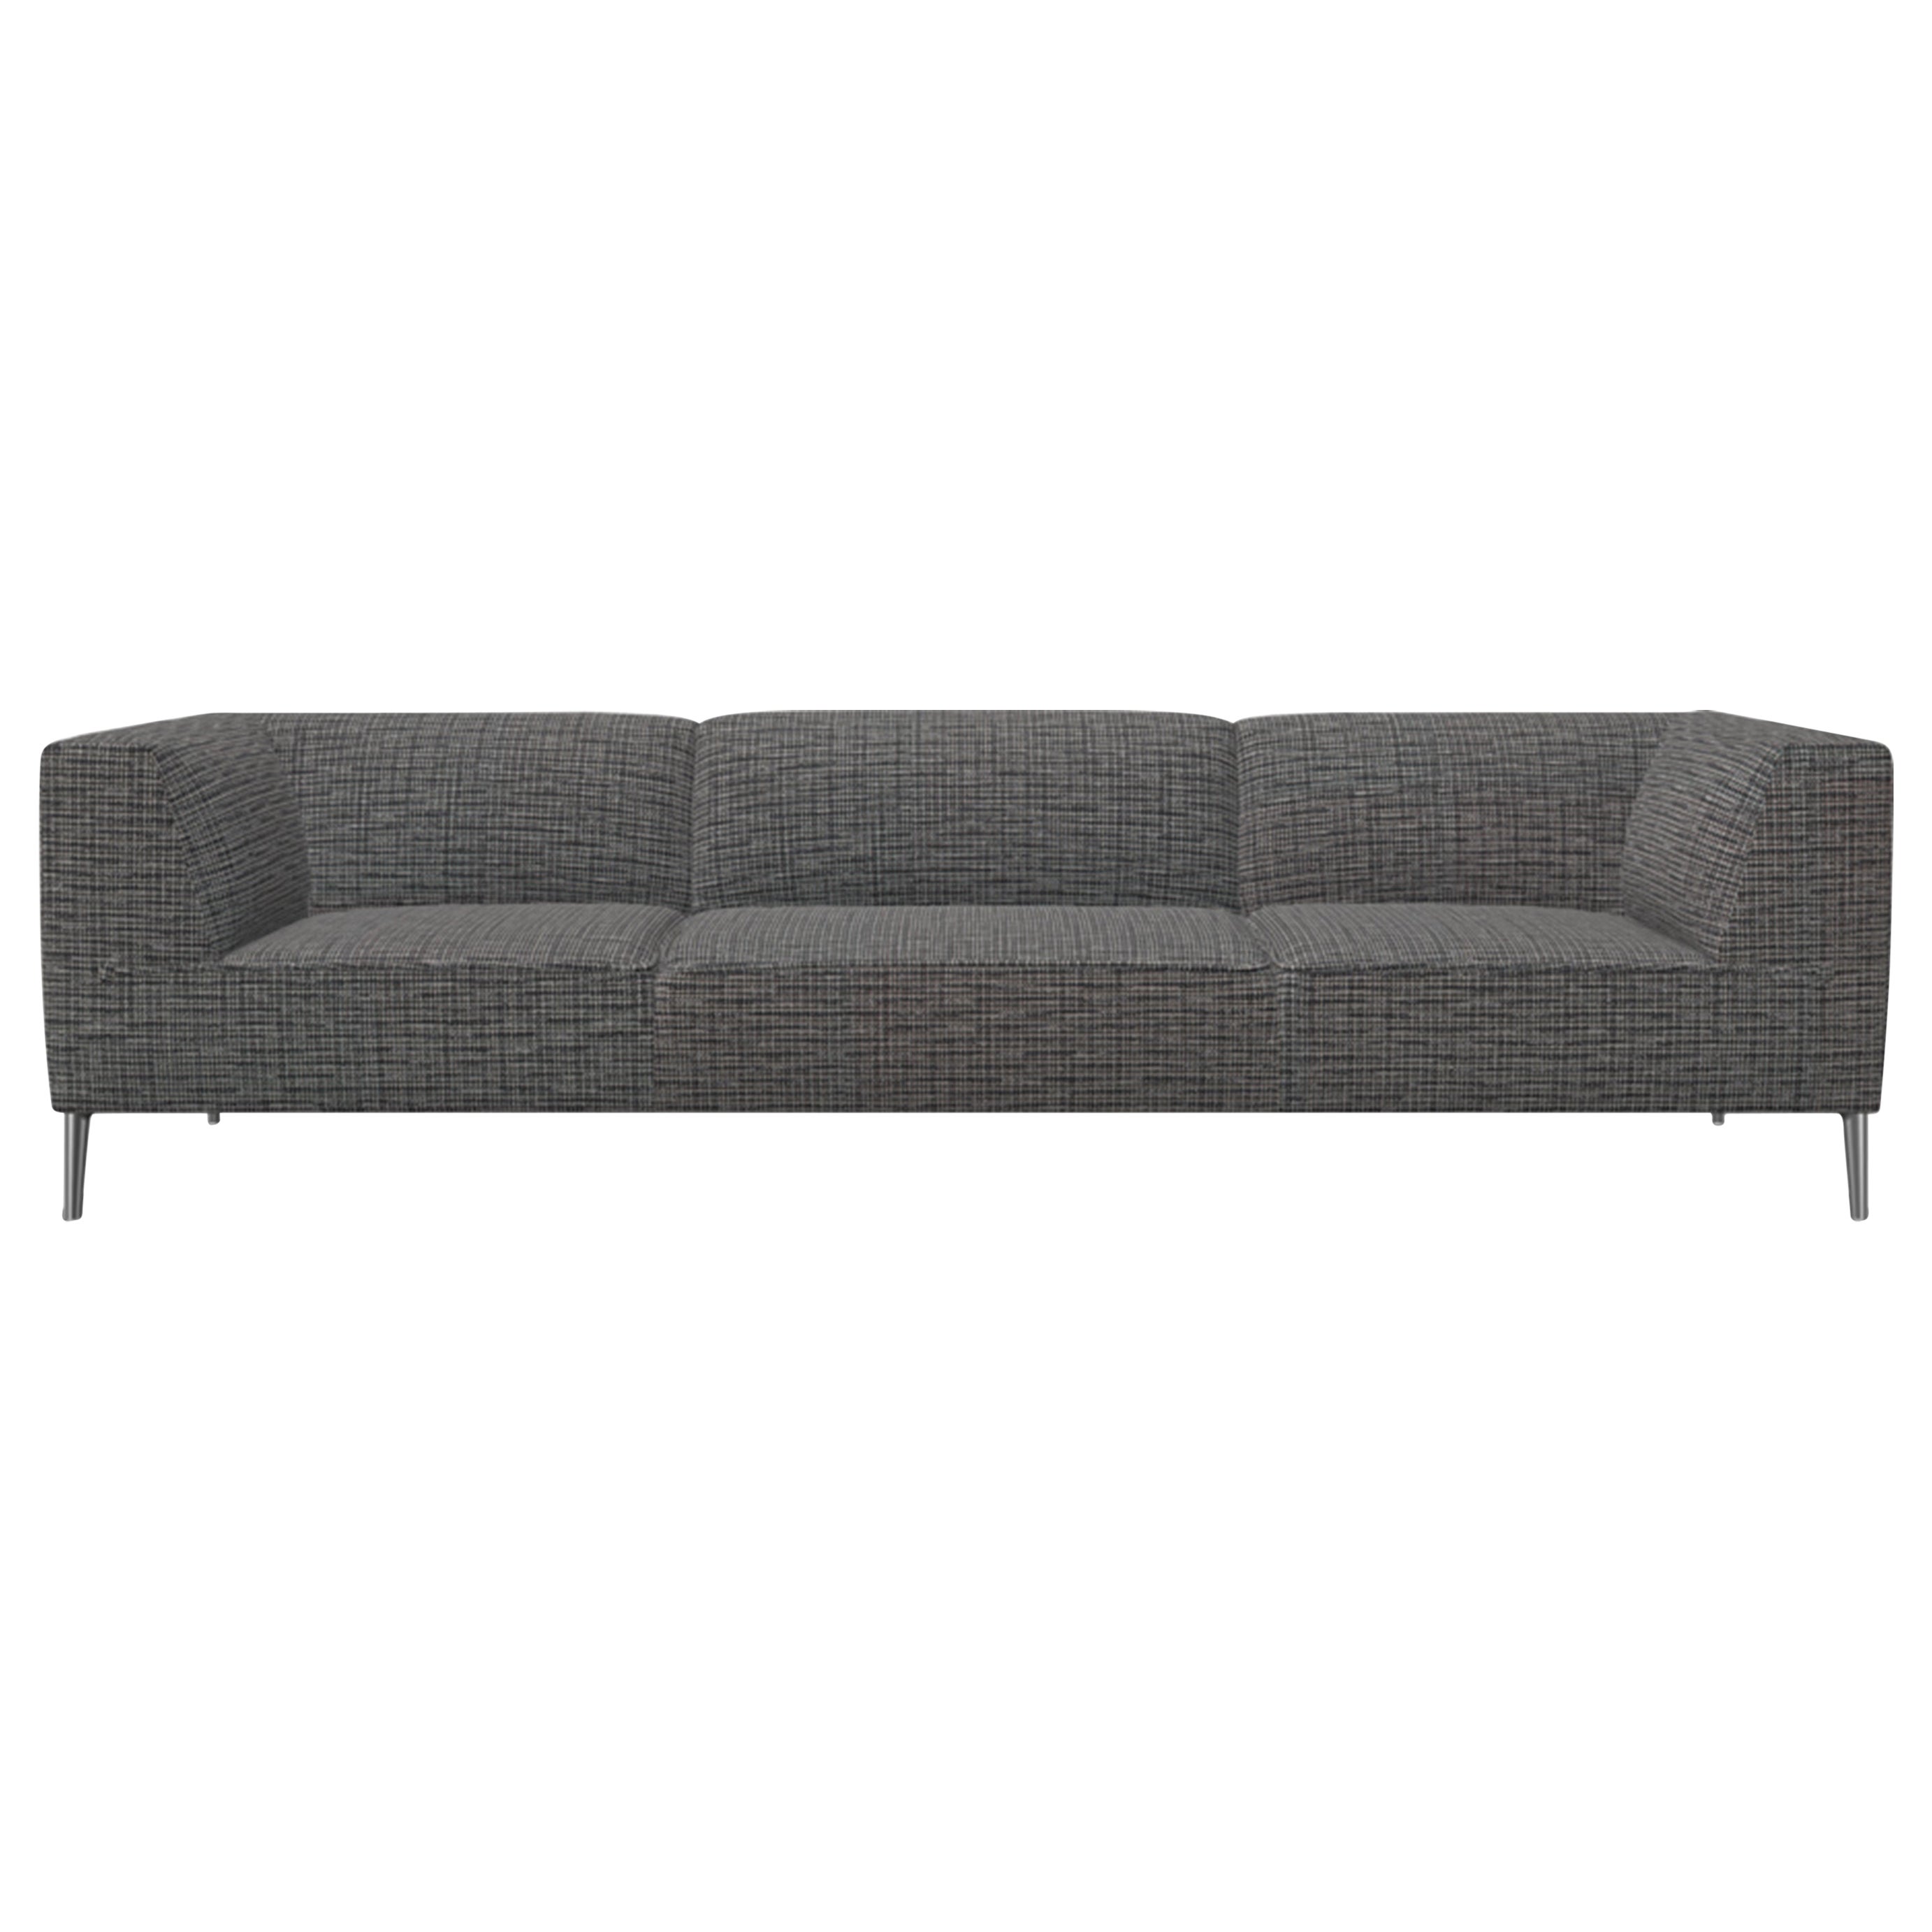 Moooi Triple Seat Sofa So Good in Boucle Upholstery with Polished Aluminum Feet